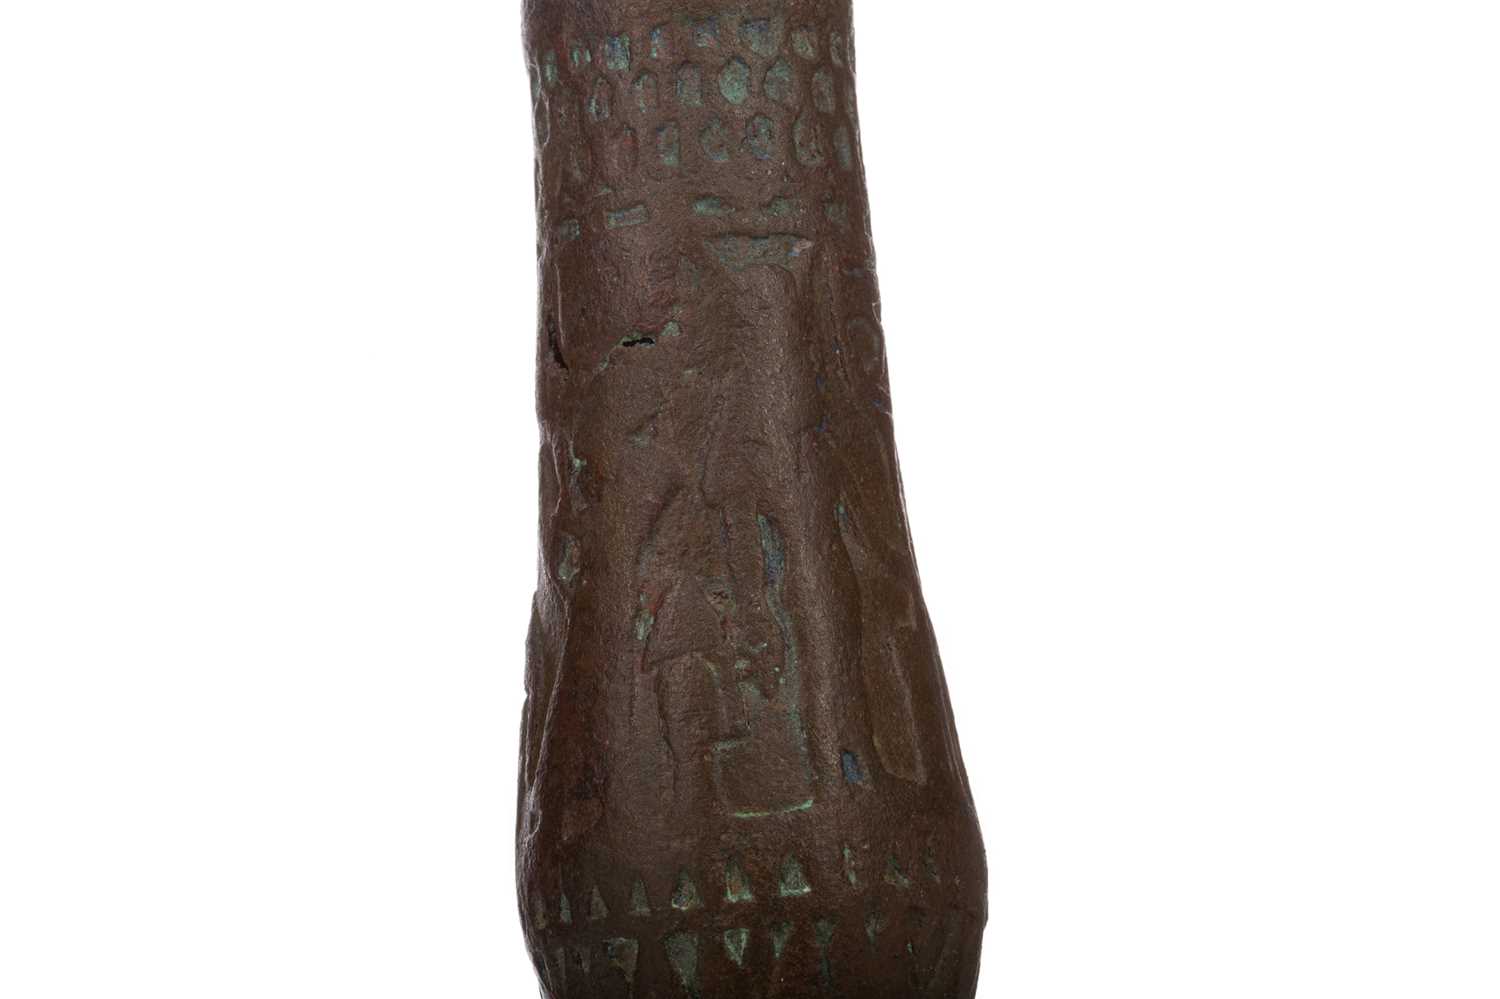 AN ANCIENT EGYPTIAN BRONZE SITULA - Image 4 of 5